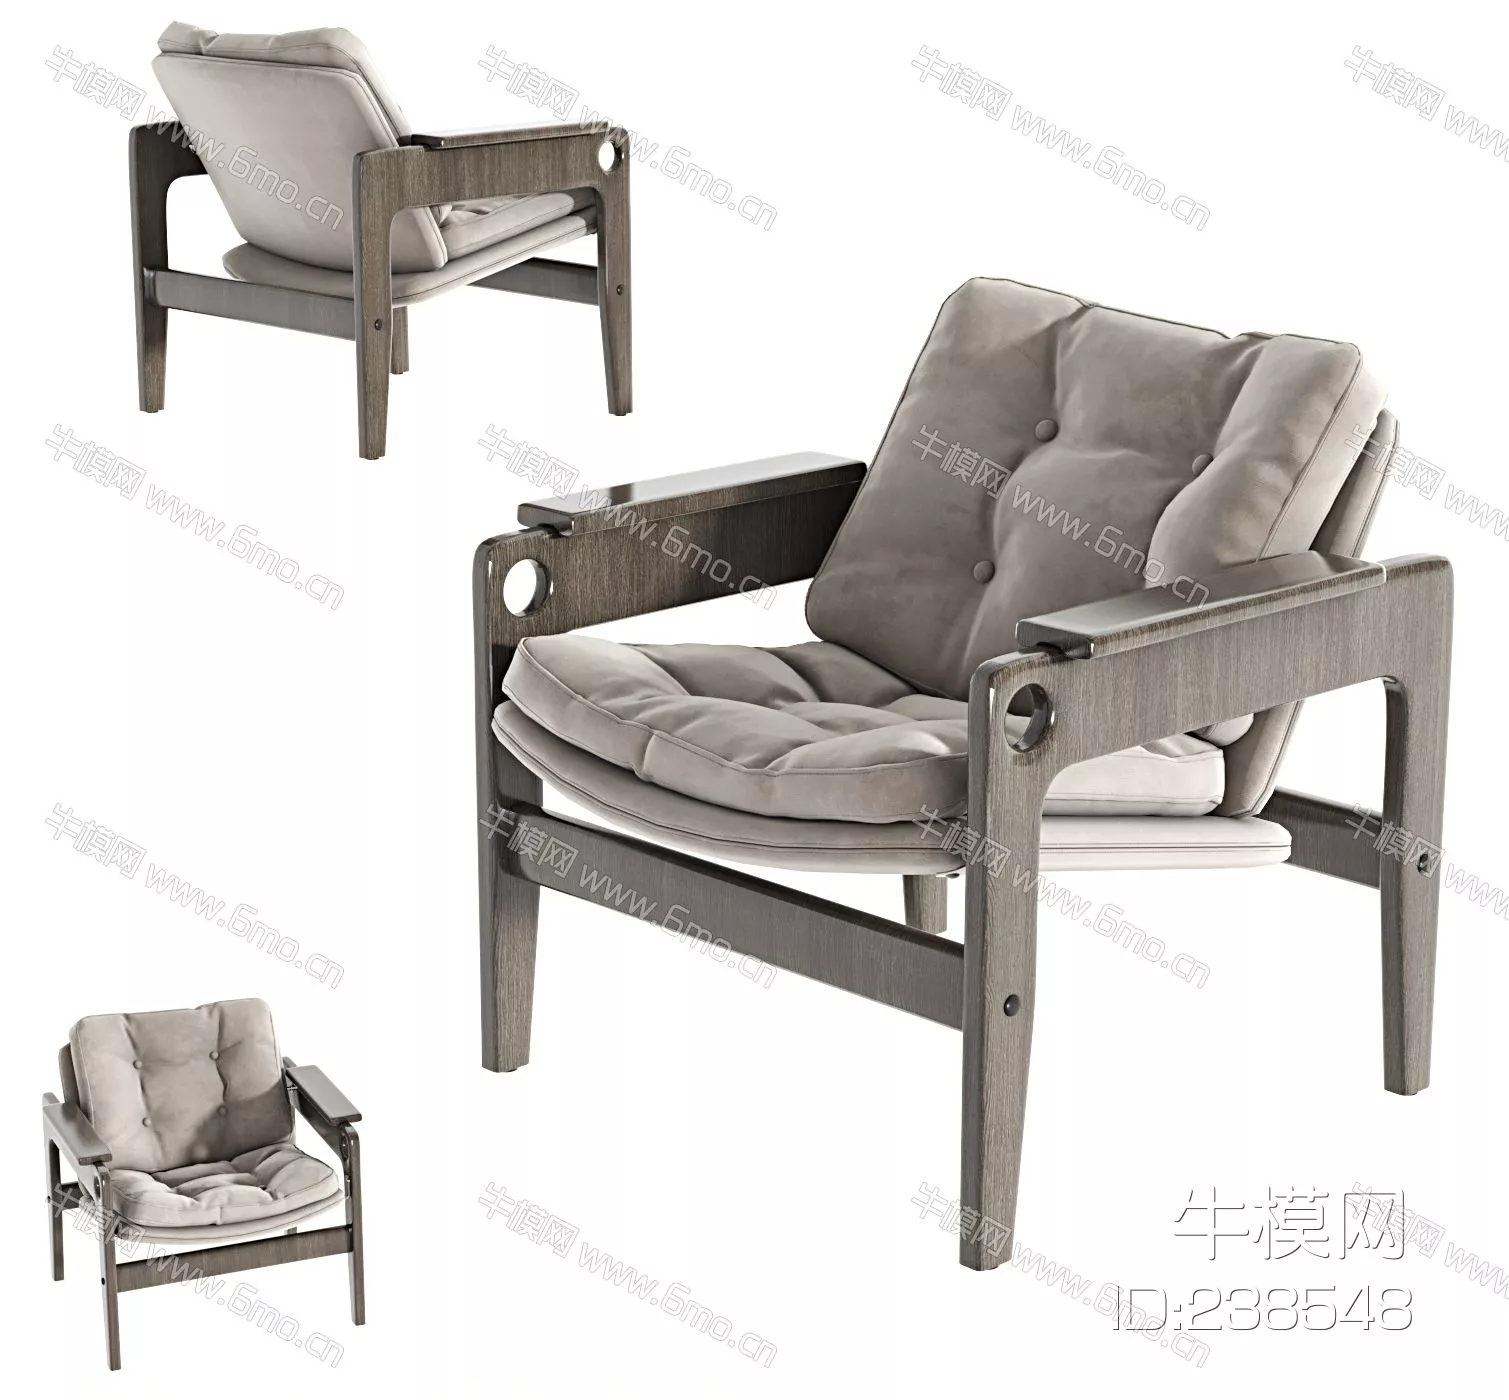 CHINESE LOUNGLE CHAIR - SKETCHUP 3D MODEL - VRAY - 238548